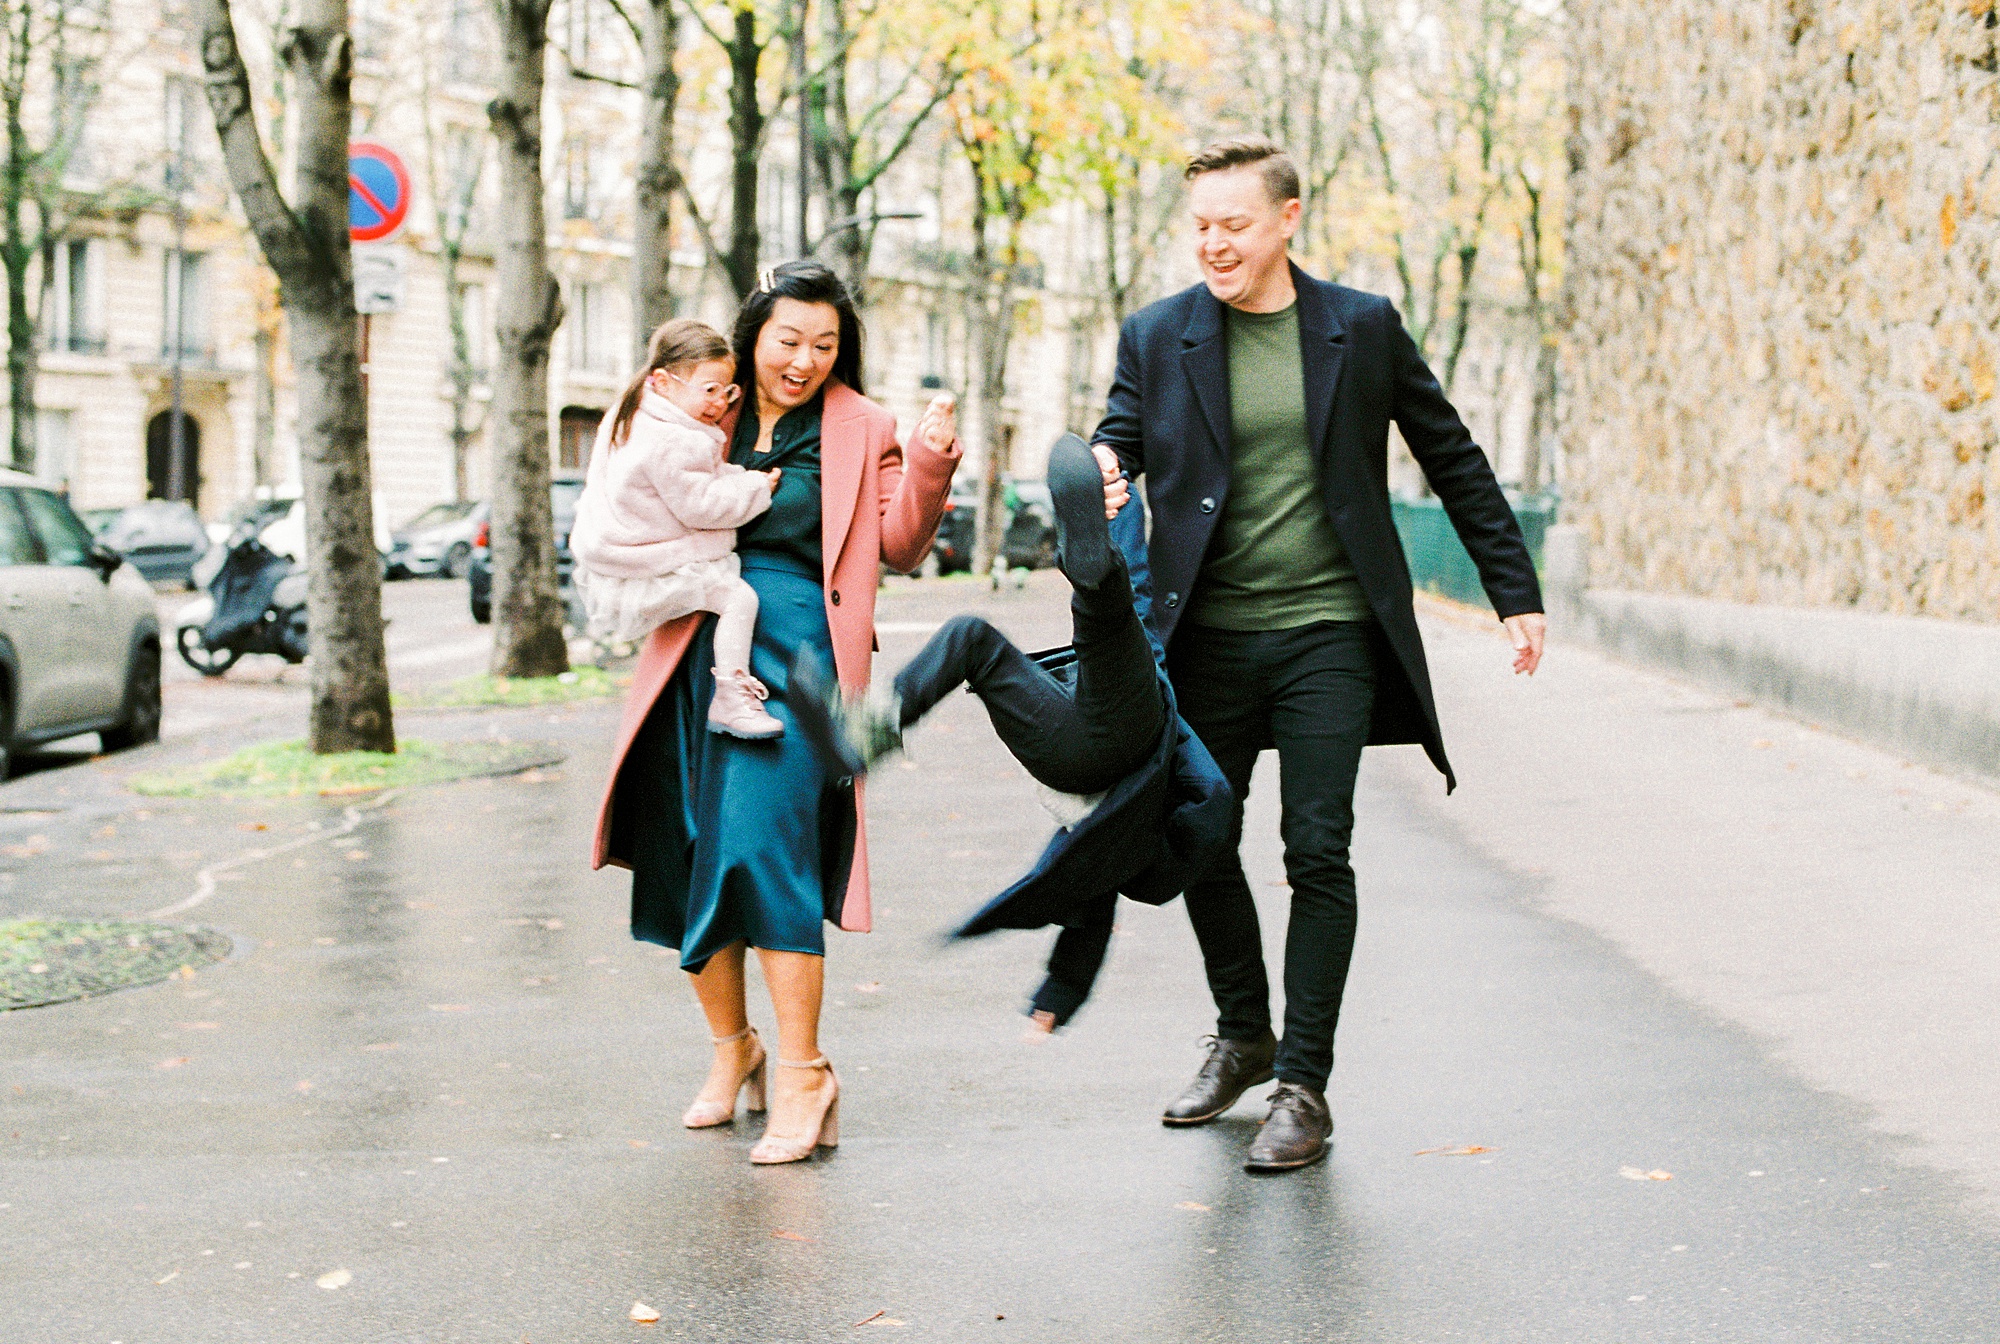 Two parents swinging their son by the arms on the sidewalk in Paris